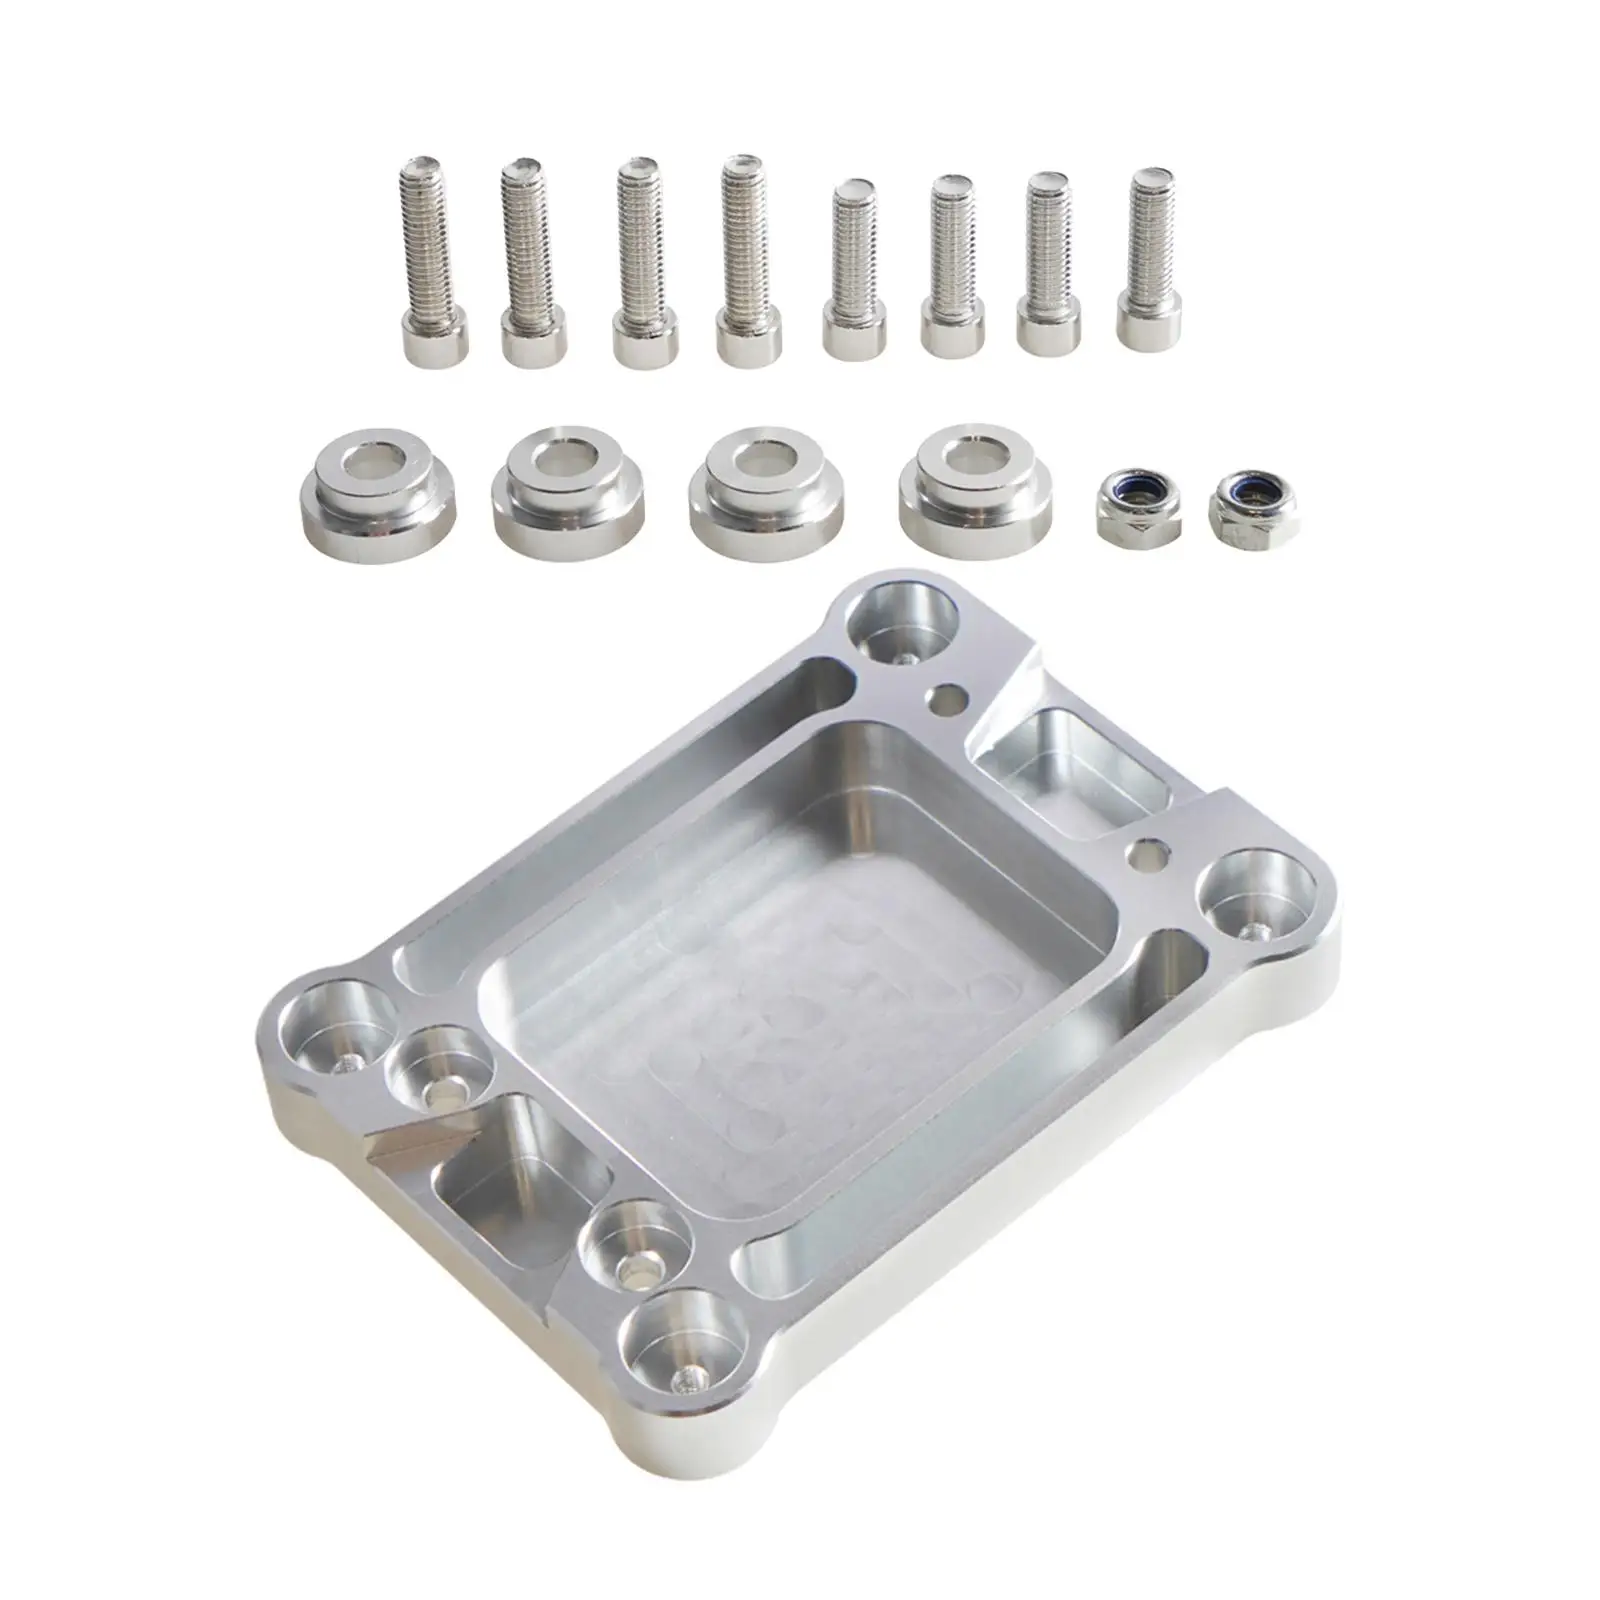 Billet Shifter Box Base Plate Accessories Professional Shift Lever Base for Acura Integra 1994-2001 Civic 1988-2000